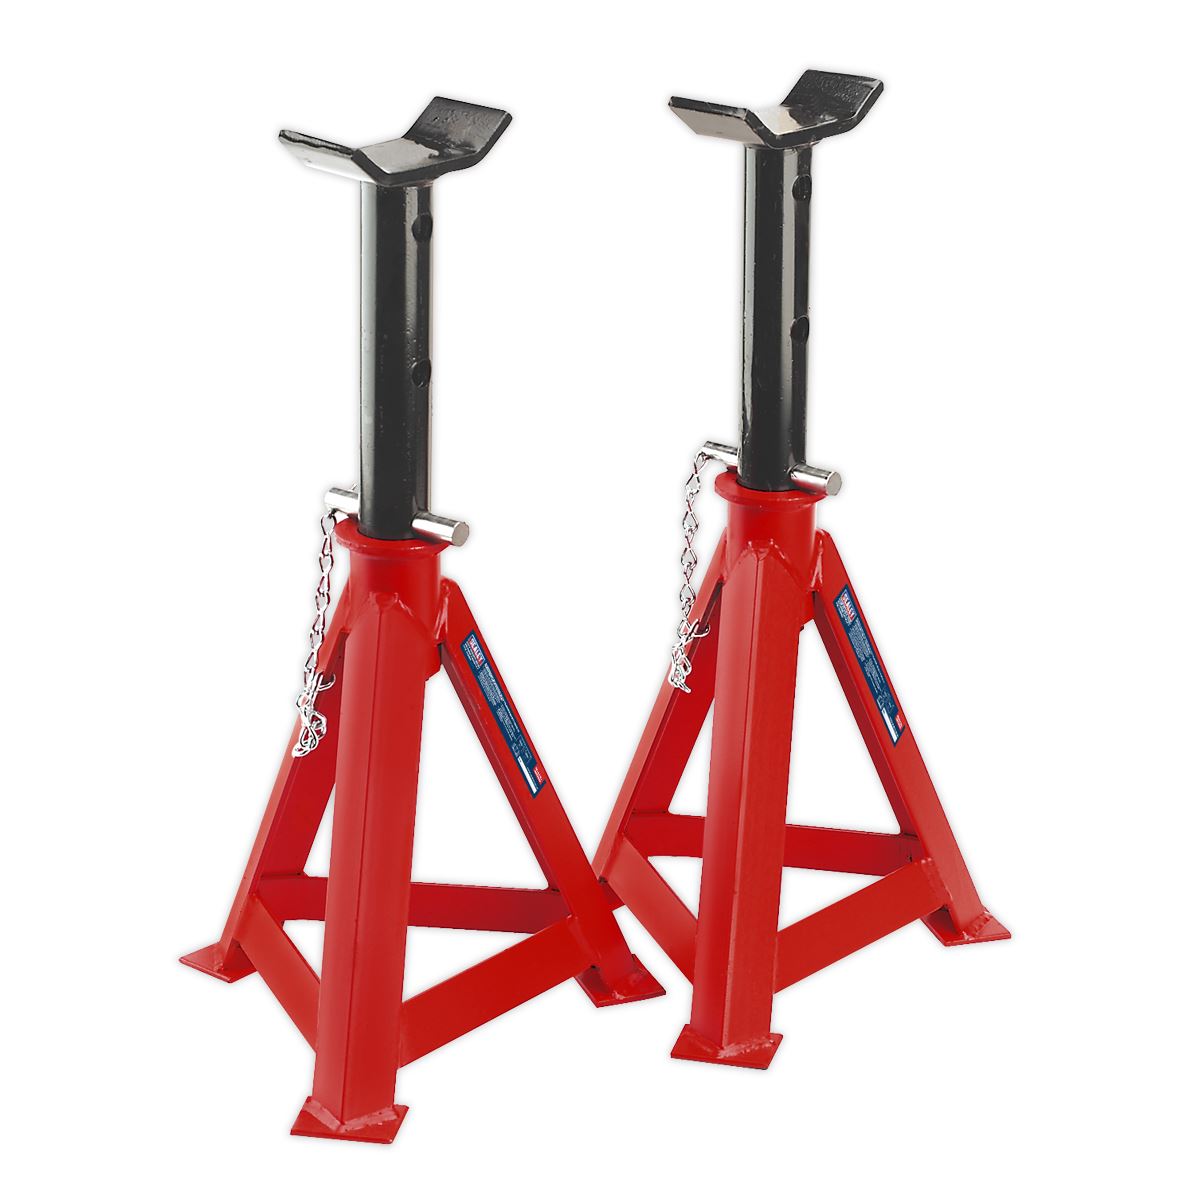 Sealey Axle Stands (Pair) 10 Tonne Capacity per Stand